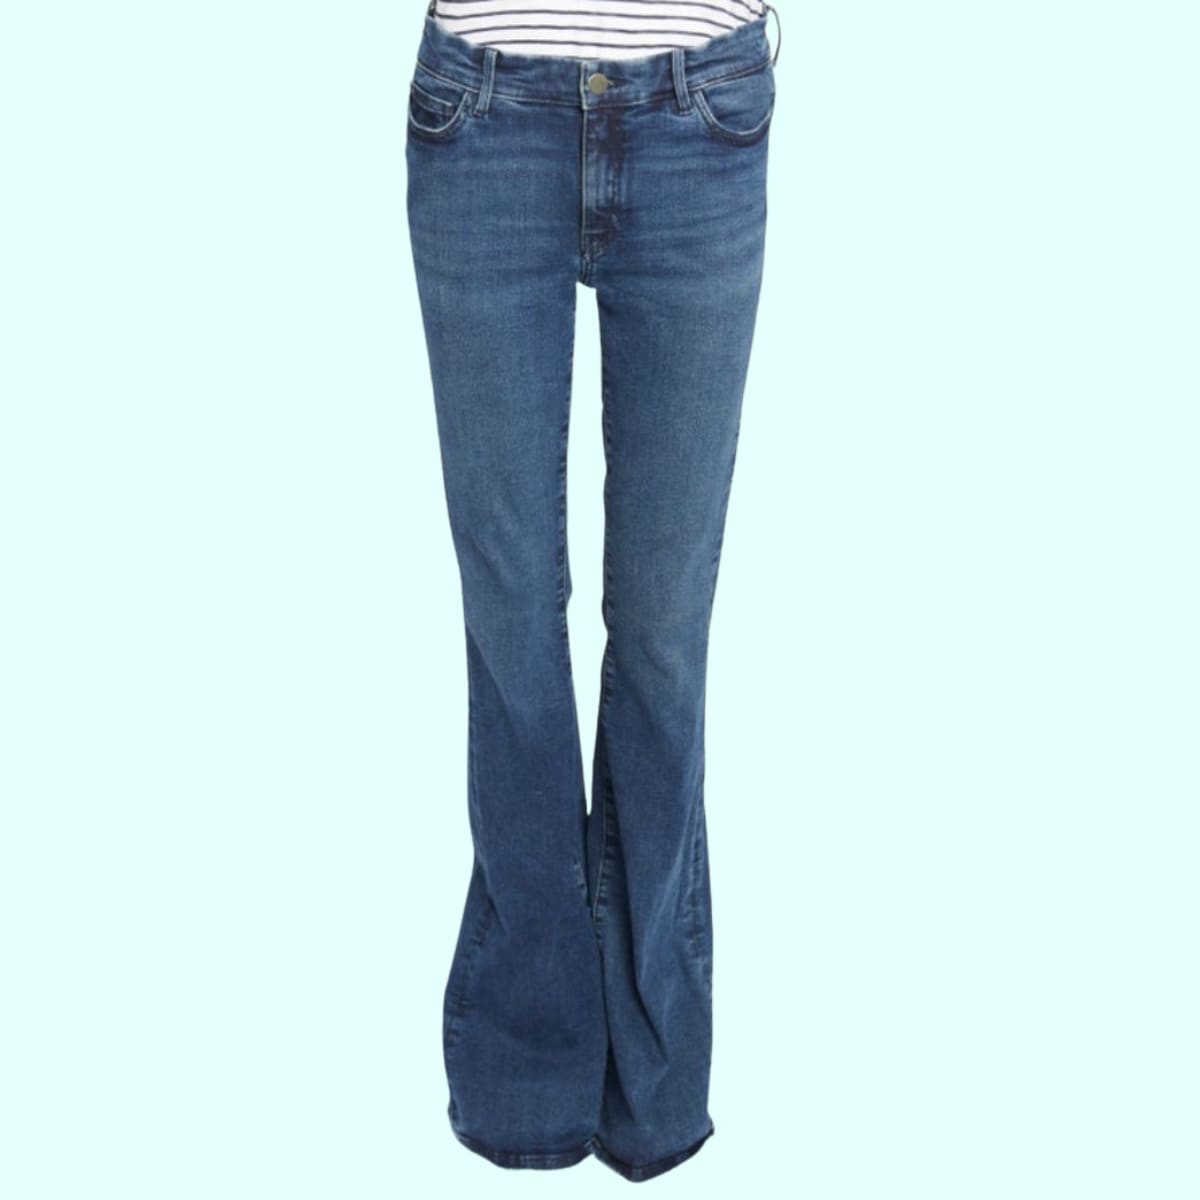 High rise flared jeans on blue background